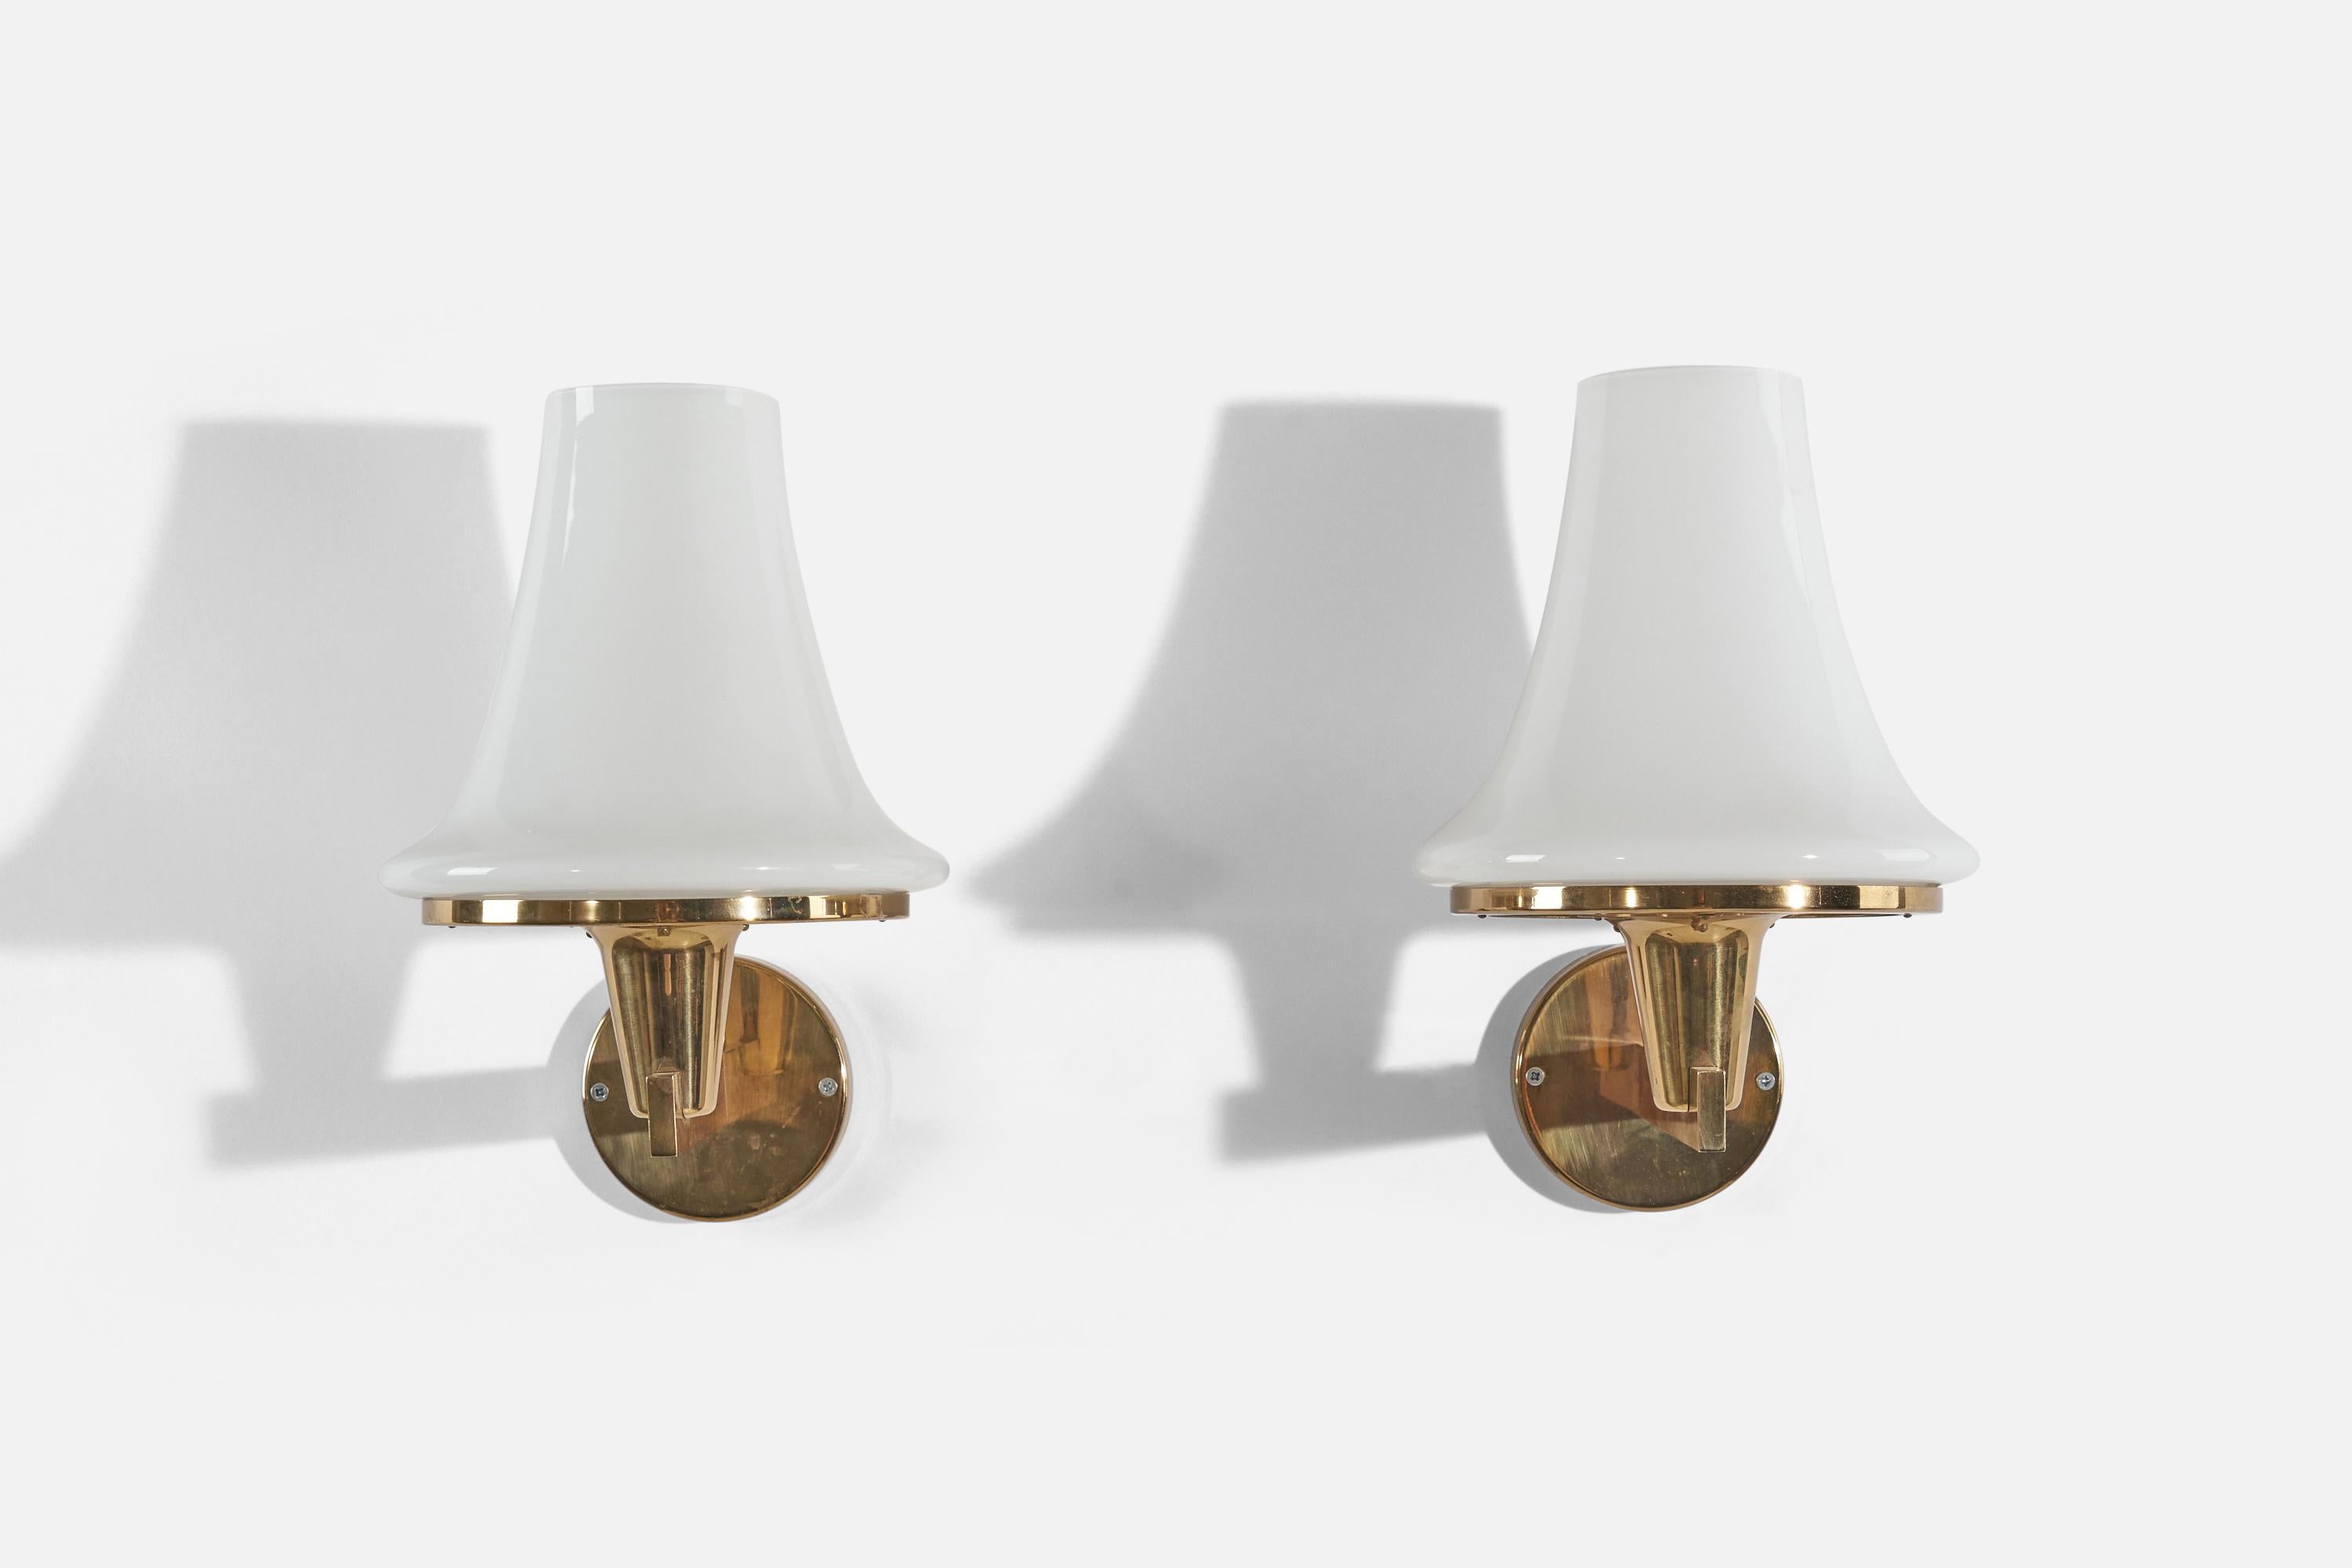 A pair of brass and milk glass wall lights designed by Hans-Agne Jakobsson and produced by his own firm in Markaryd, Sweden. c. 1960s.

Dimensions of the back plate (inches) : 4.375 x 4.375 x .1875 (H x W x D)
Does not come with screws.
 